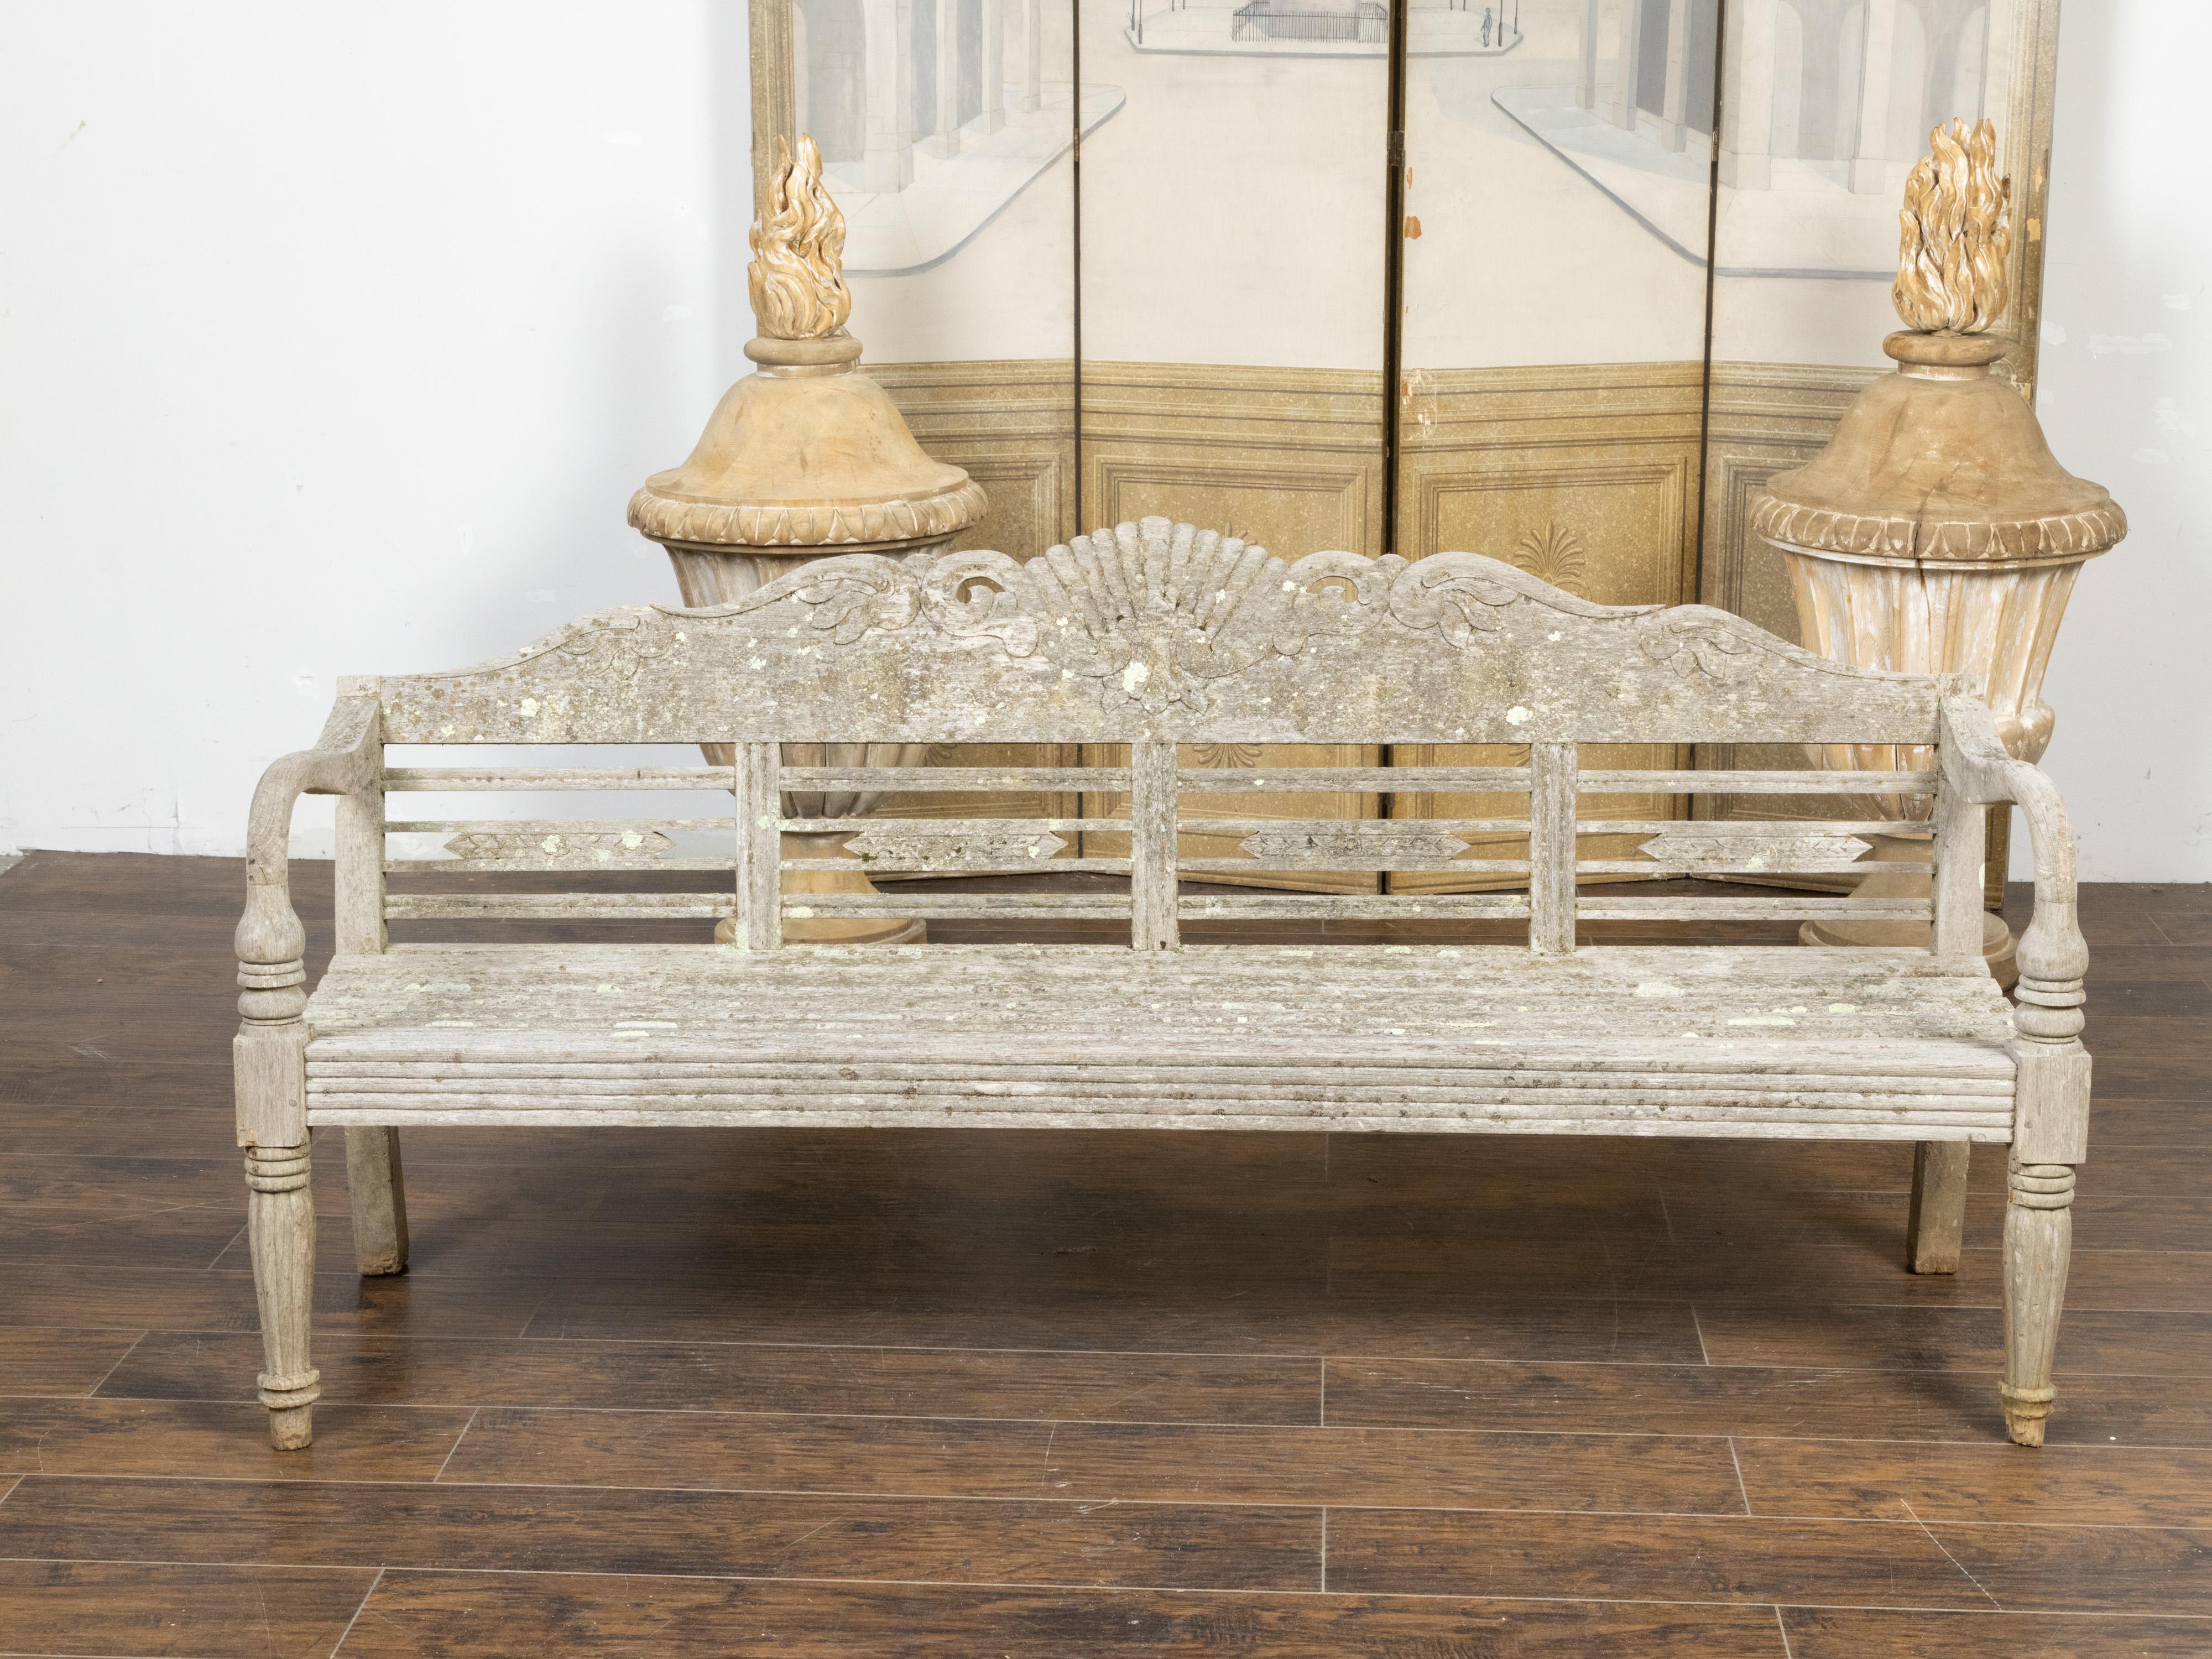 A vintage English wooden garden bench from the mid 20th century, with light paint, carved foliage and fan motifs, distressed patina and scrolling arms. Created in England during the Midcentury period, this wooden bench features a slightly slanted